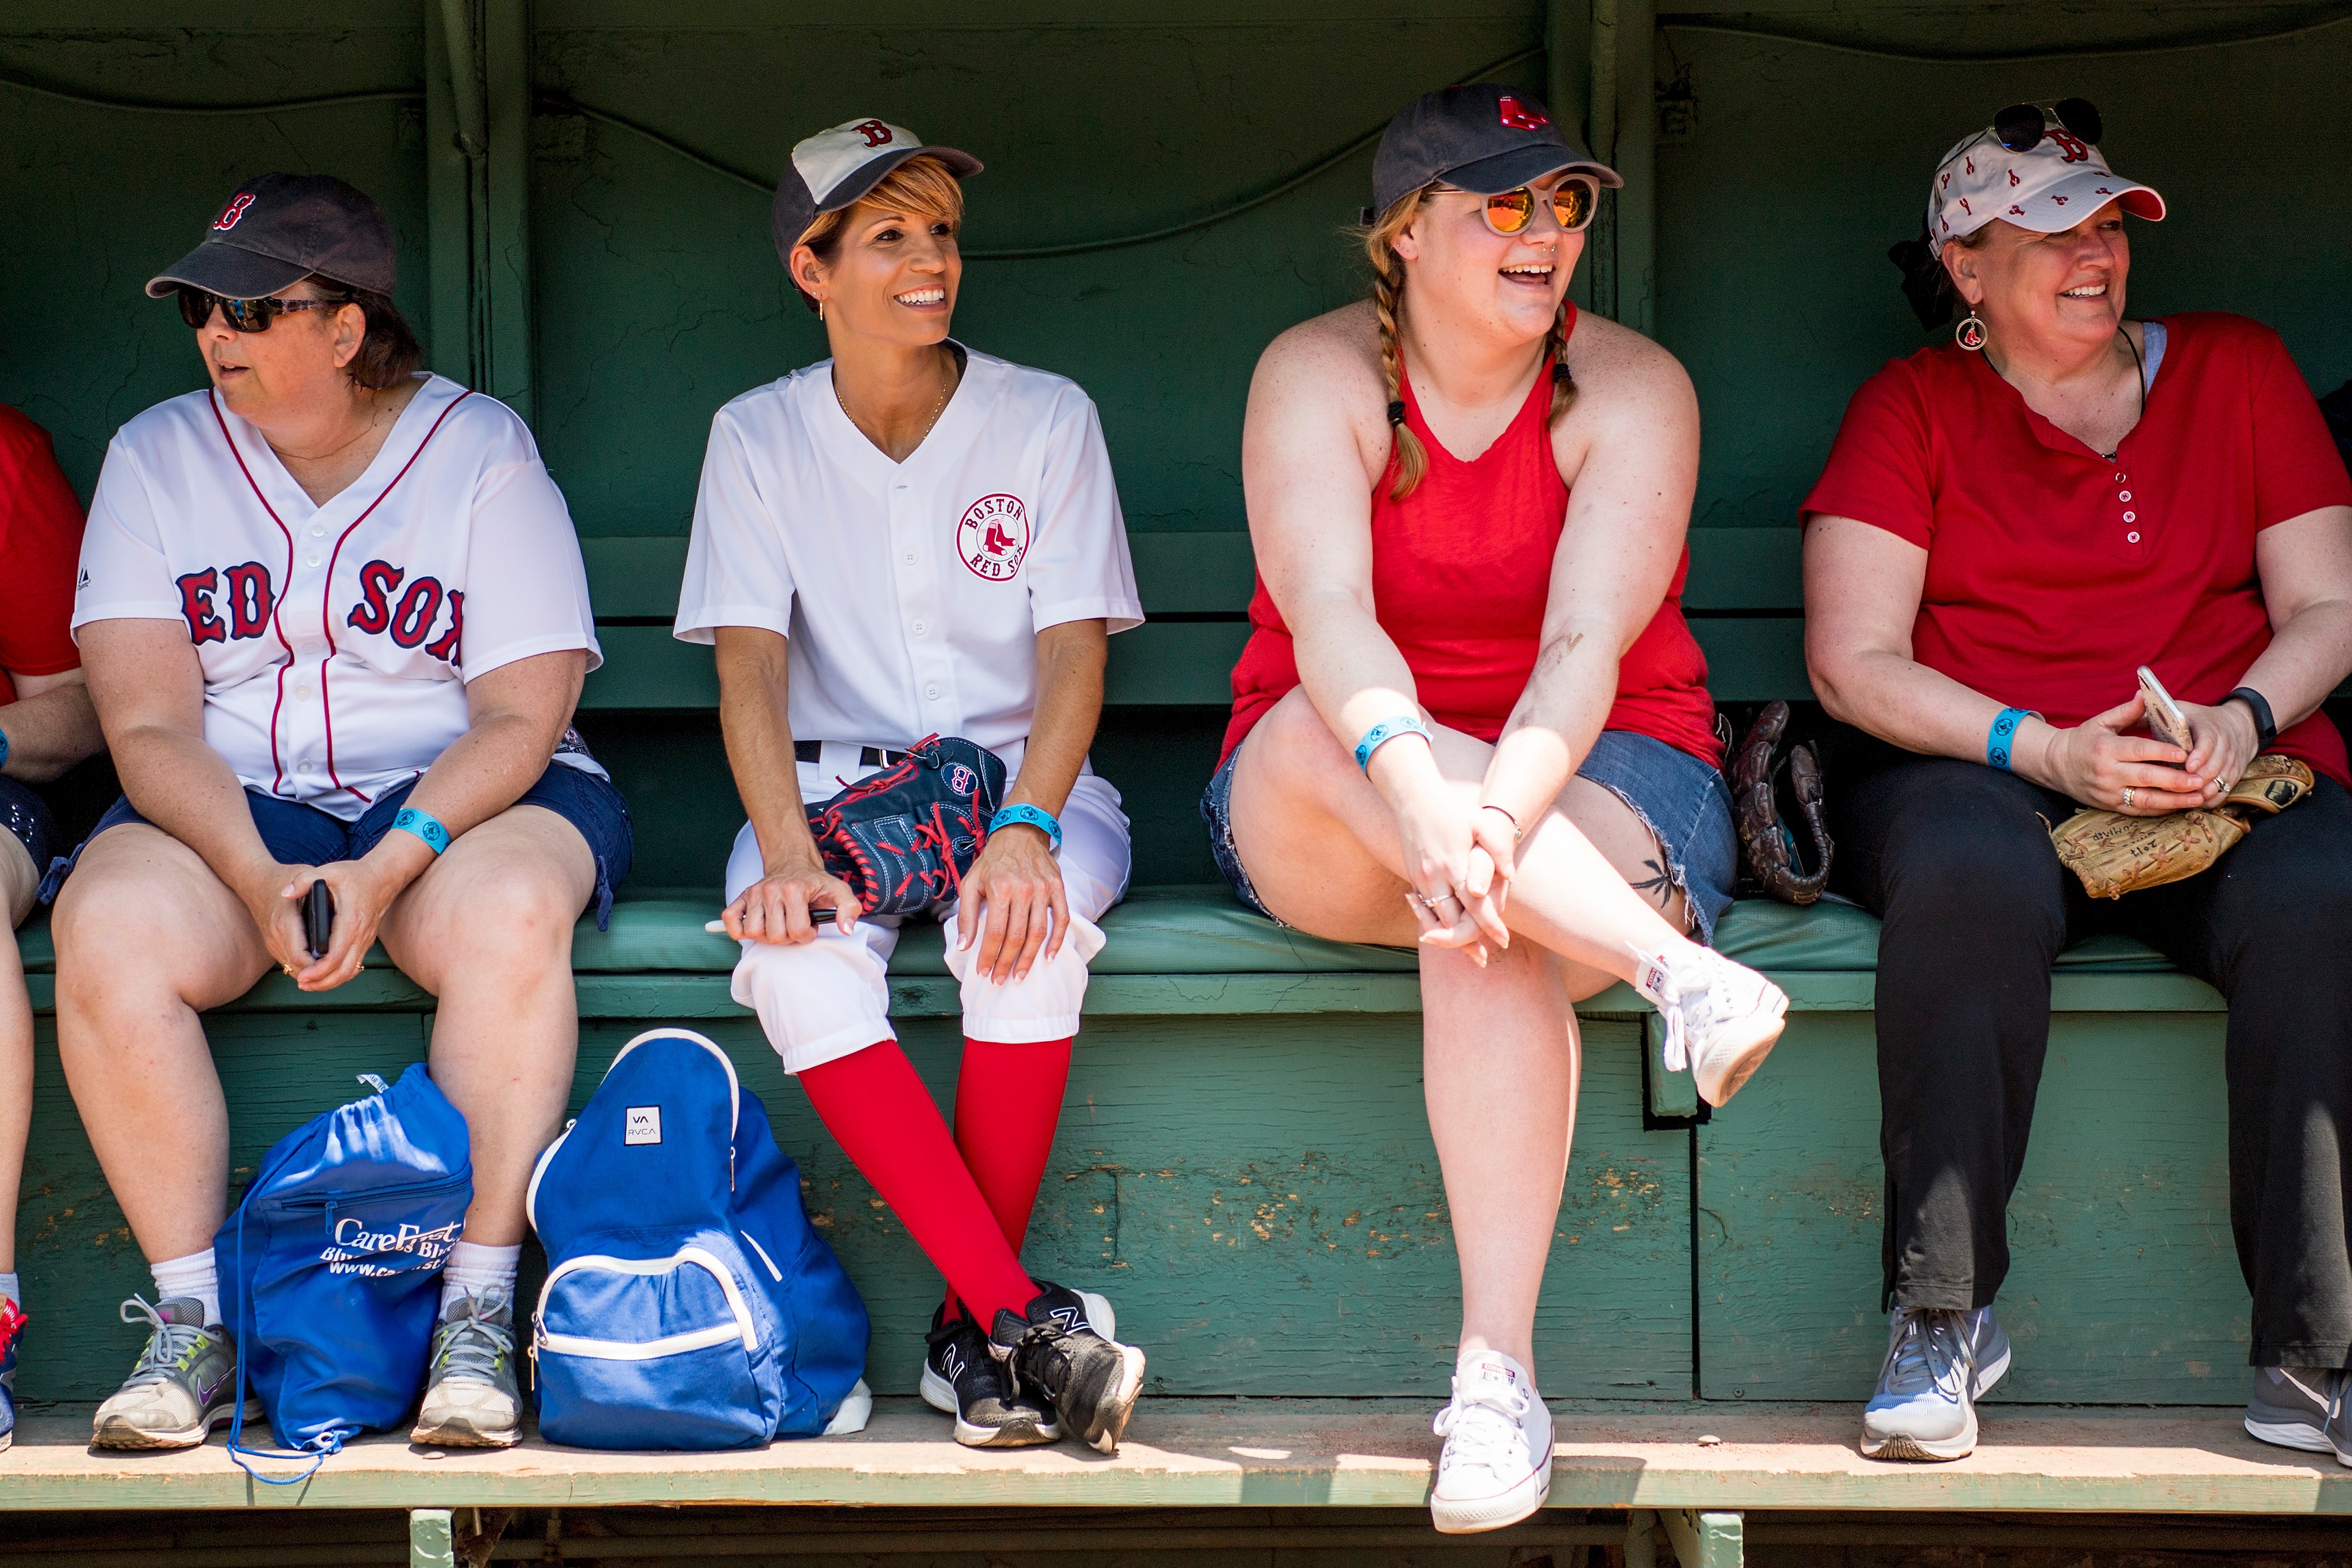 Is There Still a Place for Ladies Night in Baseball?